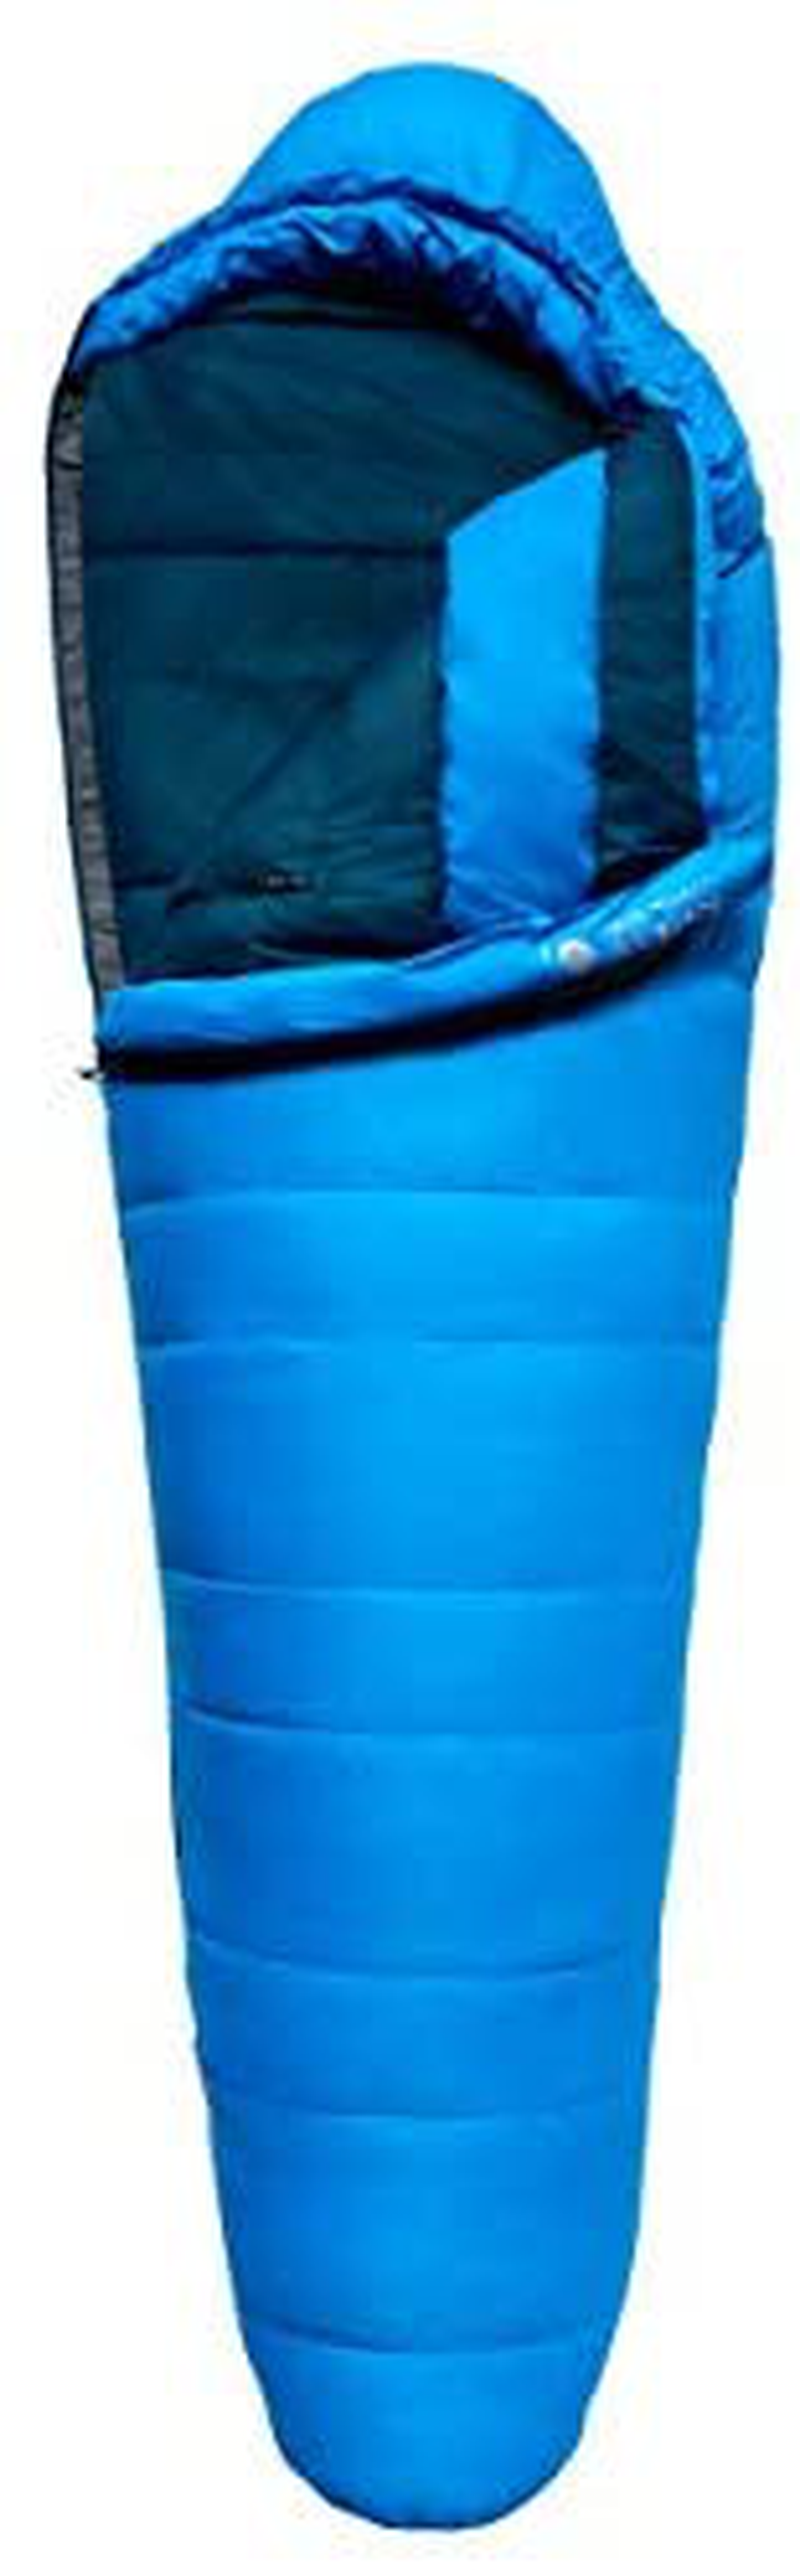 Kelty Cosmic Ultra 20 Degree Sleeping Bag, 800 Dridown, Premium Thermal Efficiency, Soft to Touch, Large Footbox, Environmental and Health Friendly C0 and Pfc-Free DWR, Compression Stuff Sack, & More